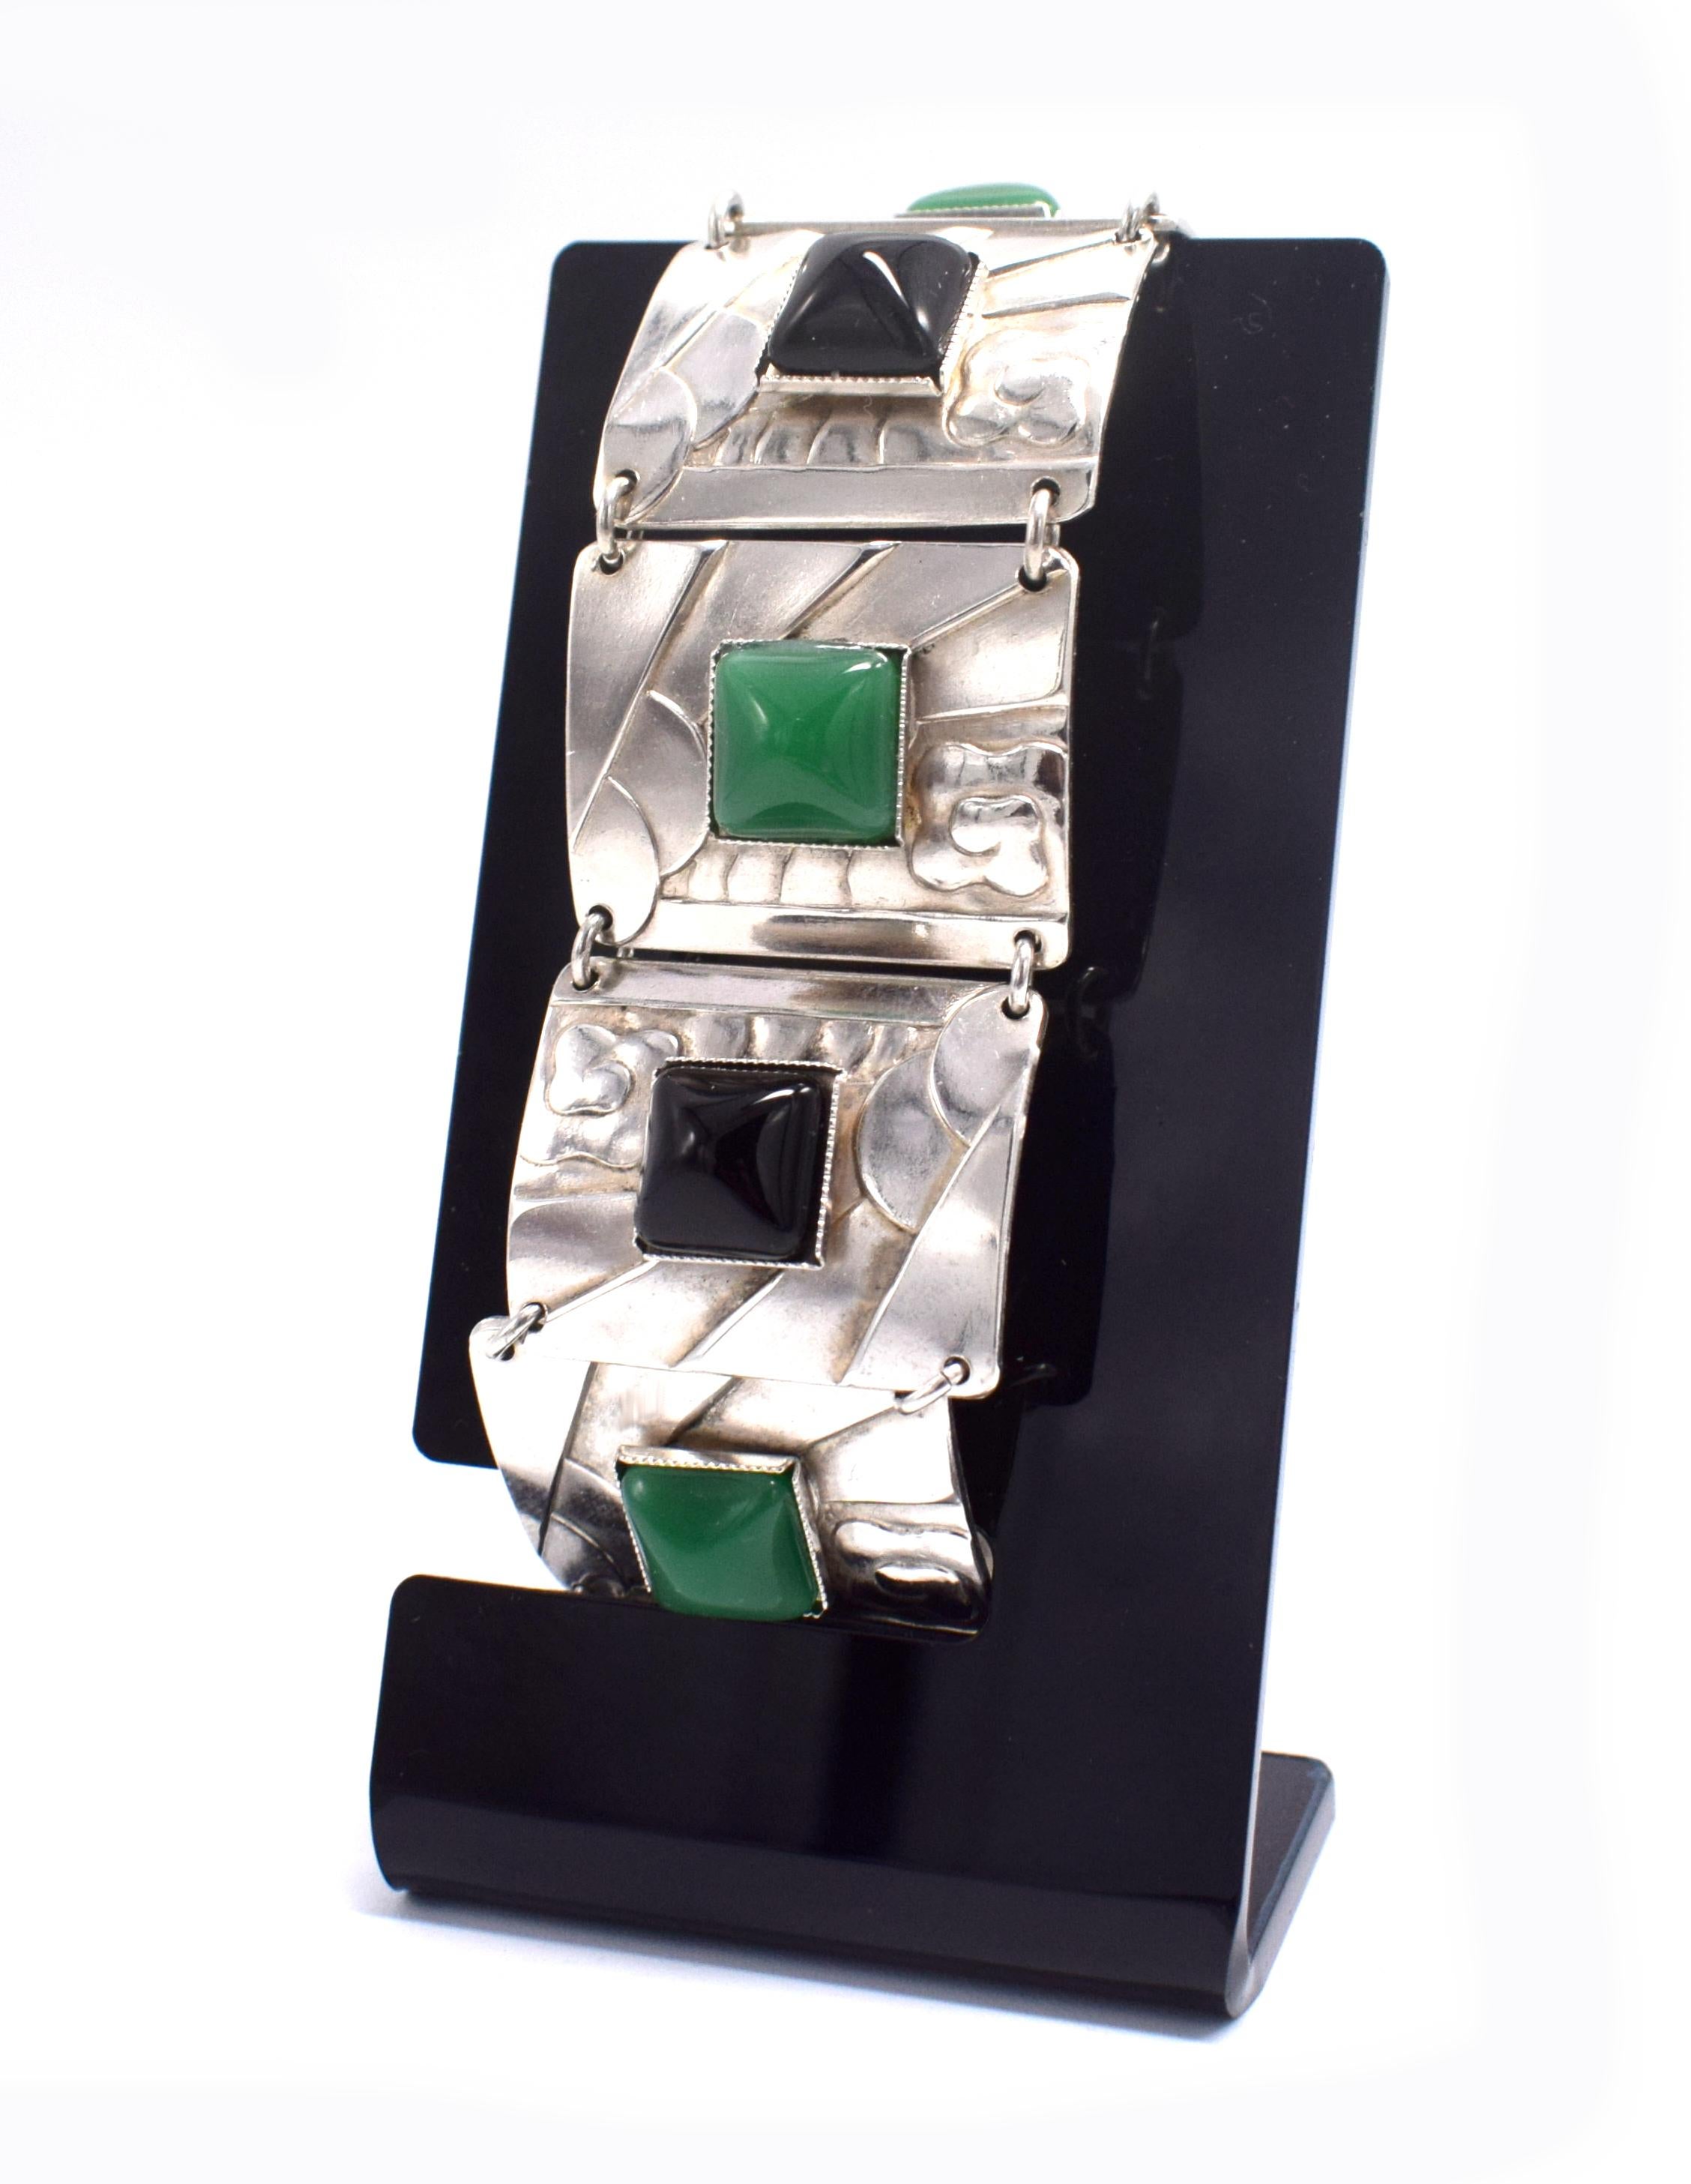 A real classic and very high quality ladies Art Deco Modernist bracelet, totally authentic and to the period, dating to the 1930's. Features an emerald green and black alternate stones which are mounted on silver plated linked panels which are